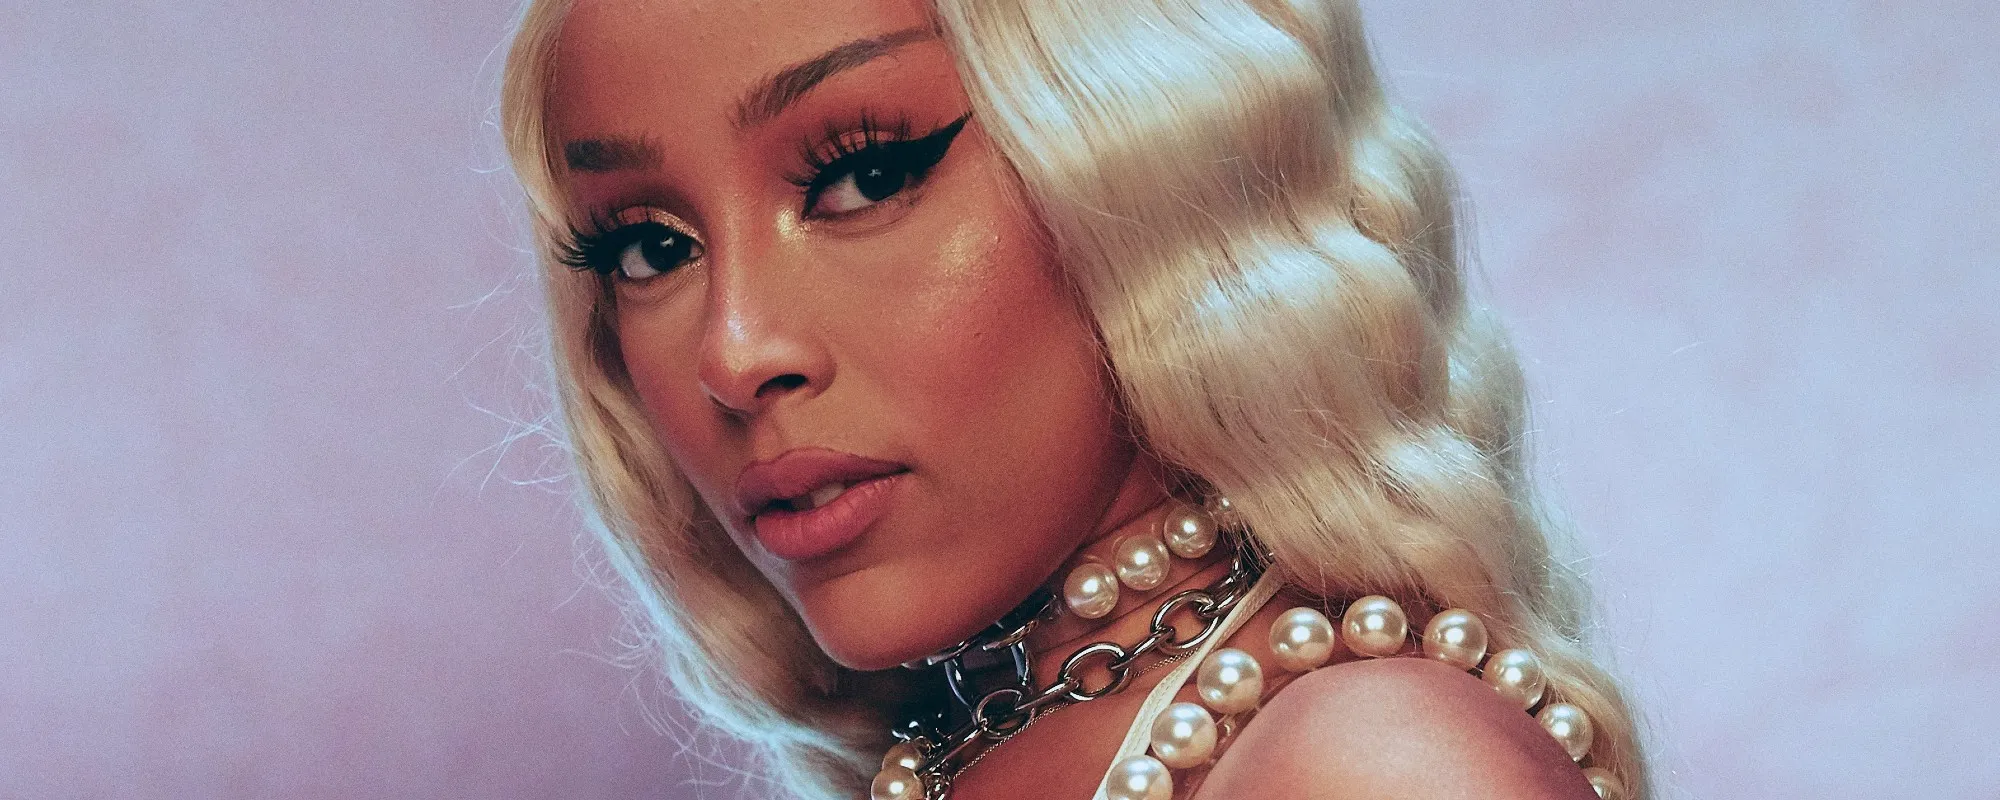 Doja Cat Launches ‘Planet Her’ Era With SZA-Featuring “Kiss Me More”